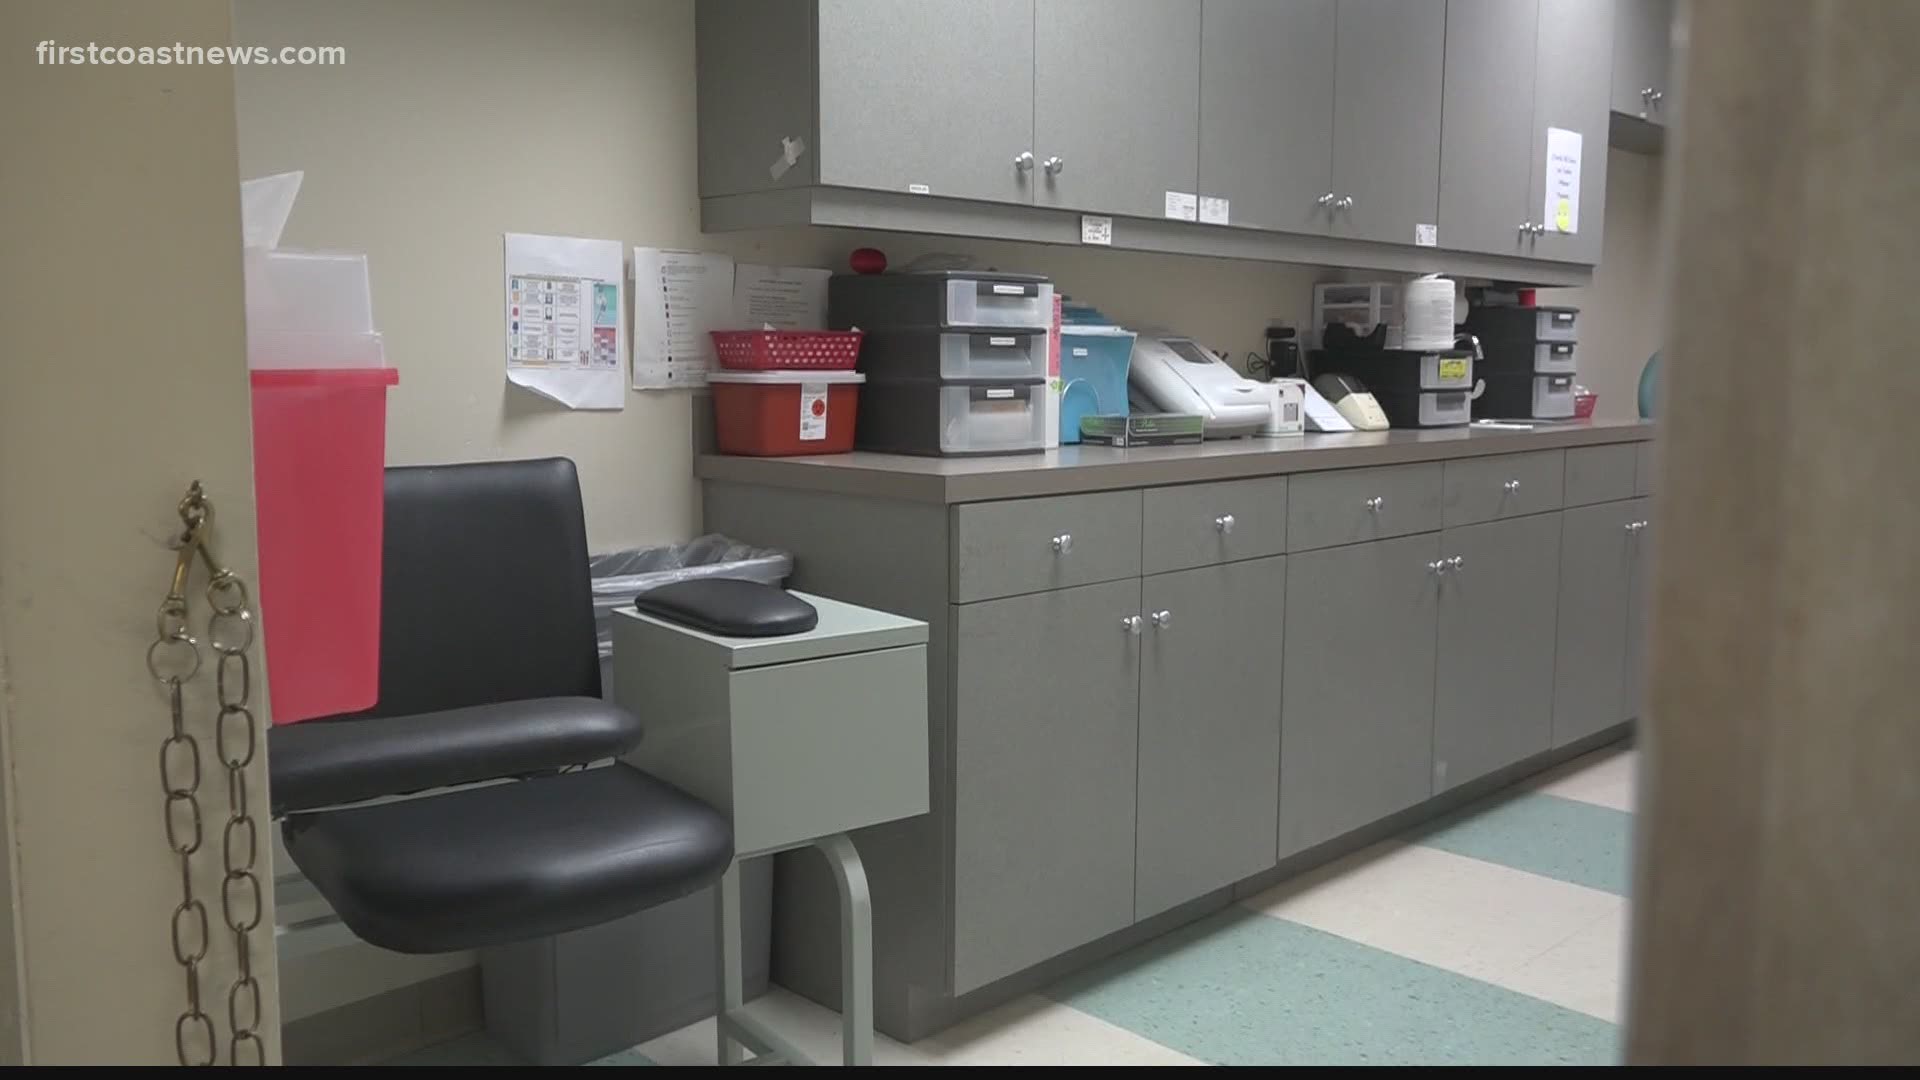 The Jacksonville Center for Clinical Research will be conducting multiple trials starting in June.